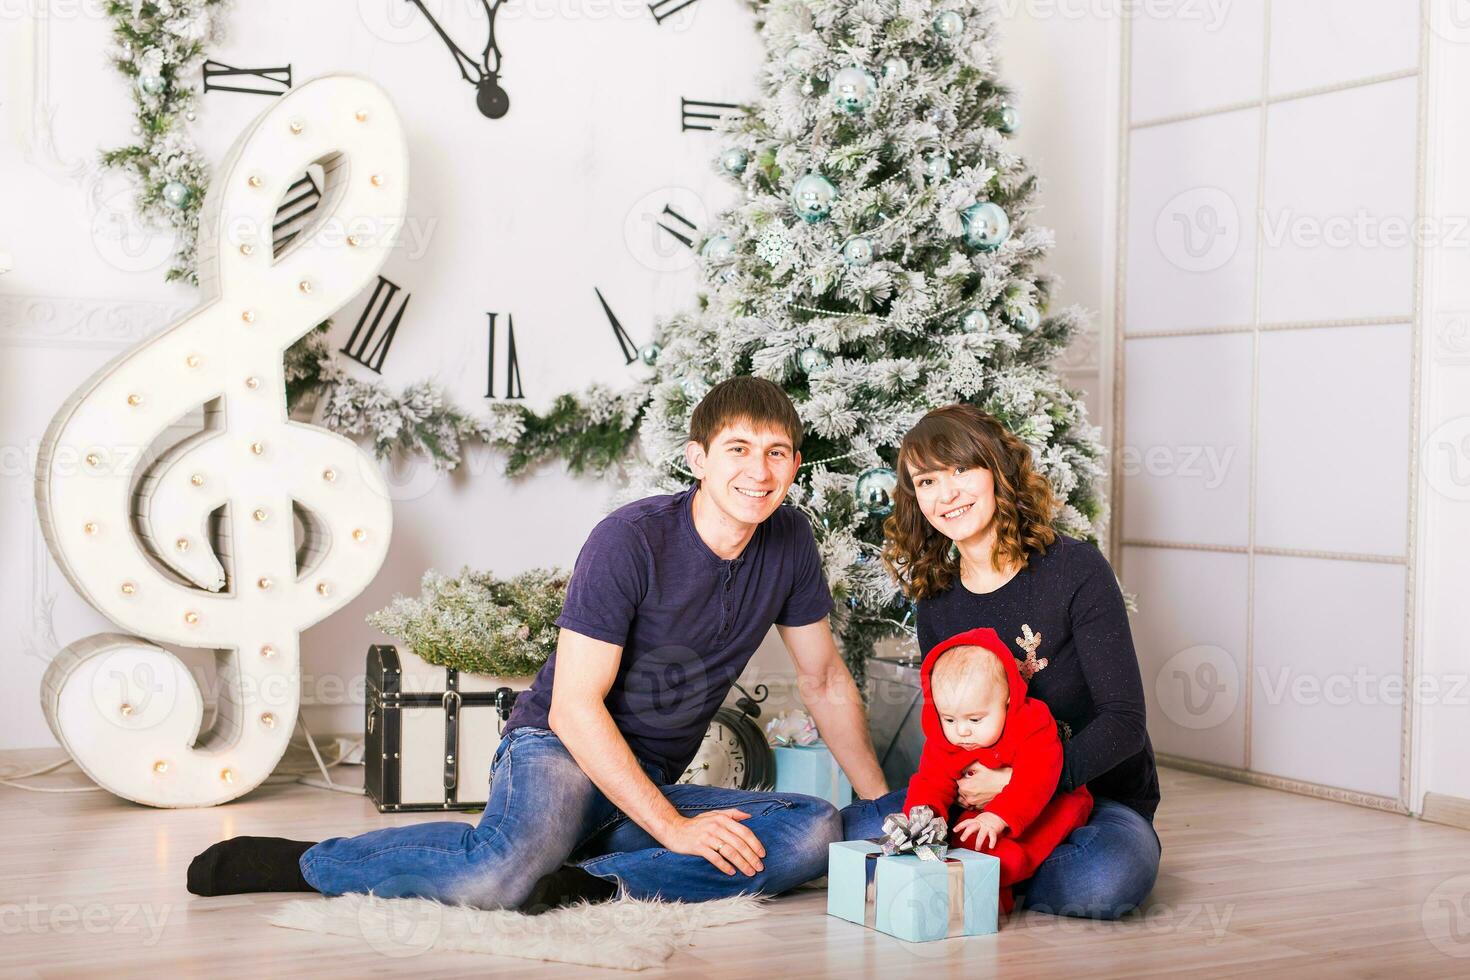 Christmas Family Portrait In Home Holiday Living Room, House Decorating By Xmas Tree photo